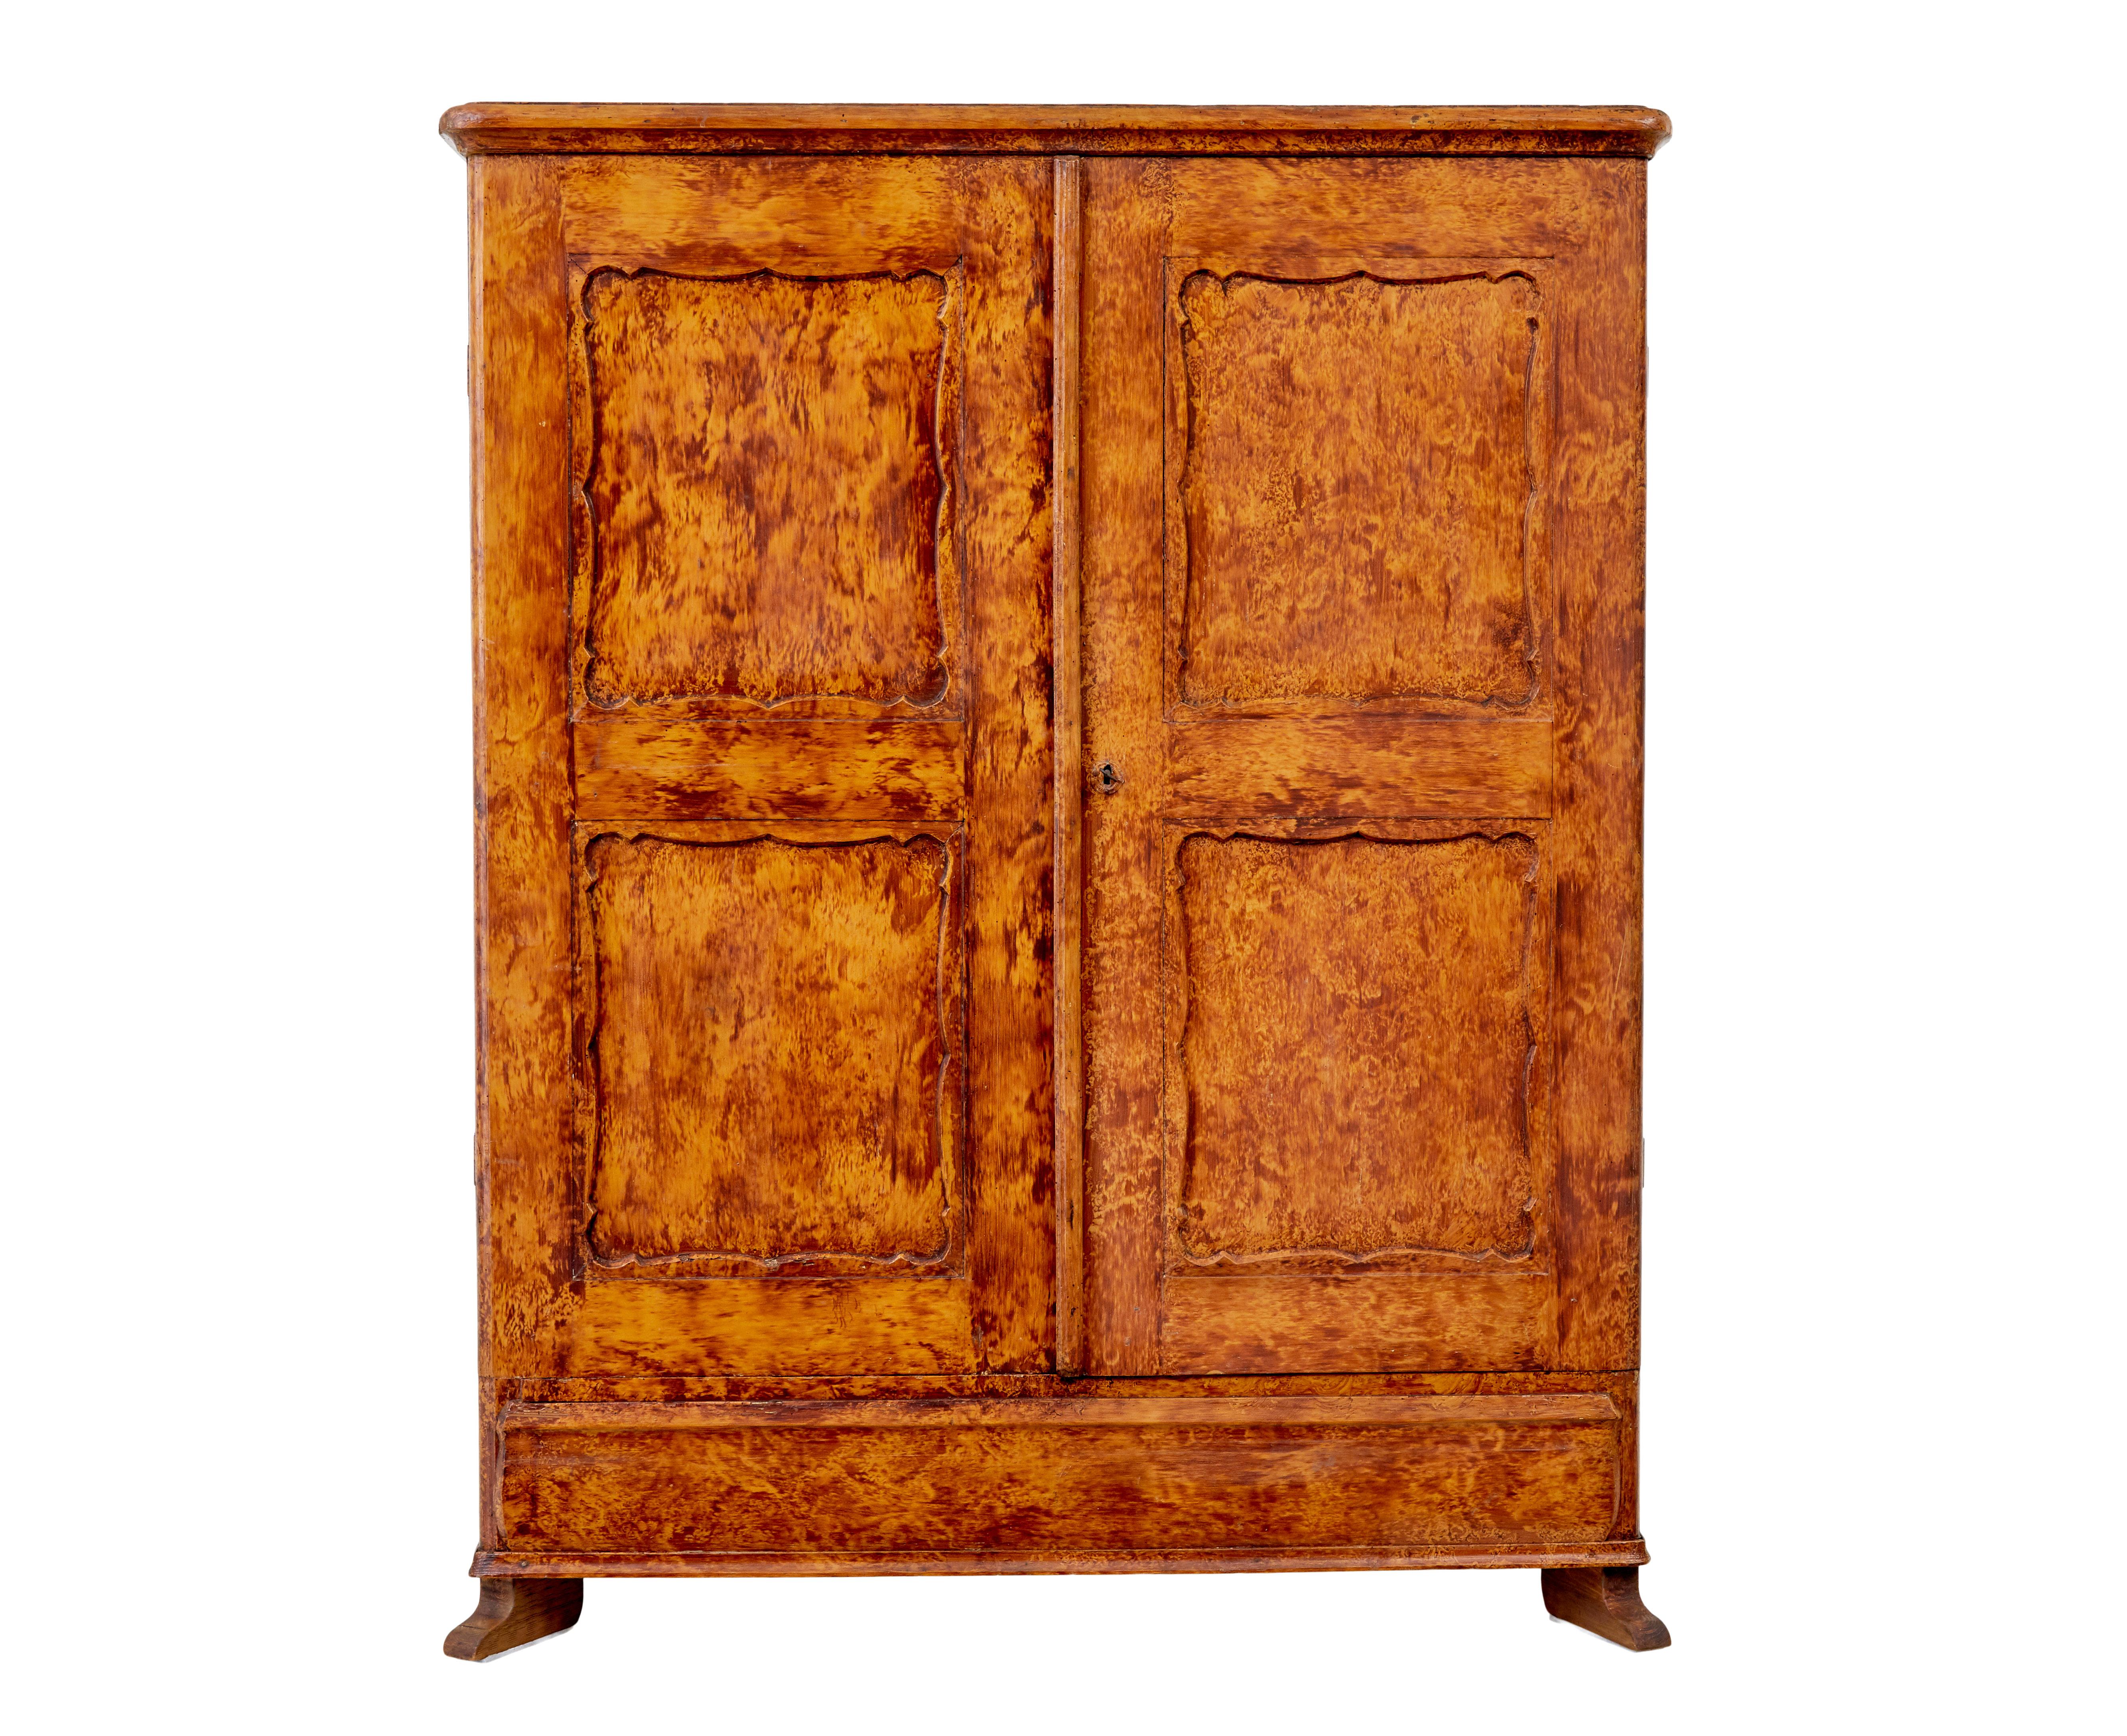 Good quality traditional Swedish cupboard circa 1860.

Presented in its original rag work paint effect.  Double doors open to reveal a partially fitted interior which indicates this was being used as a wardrobe.

2 shelves and 4 drawers, also a